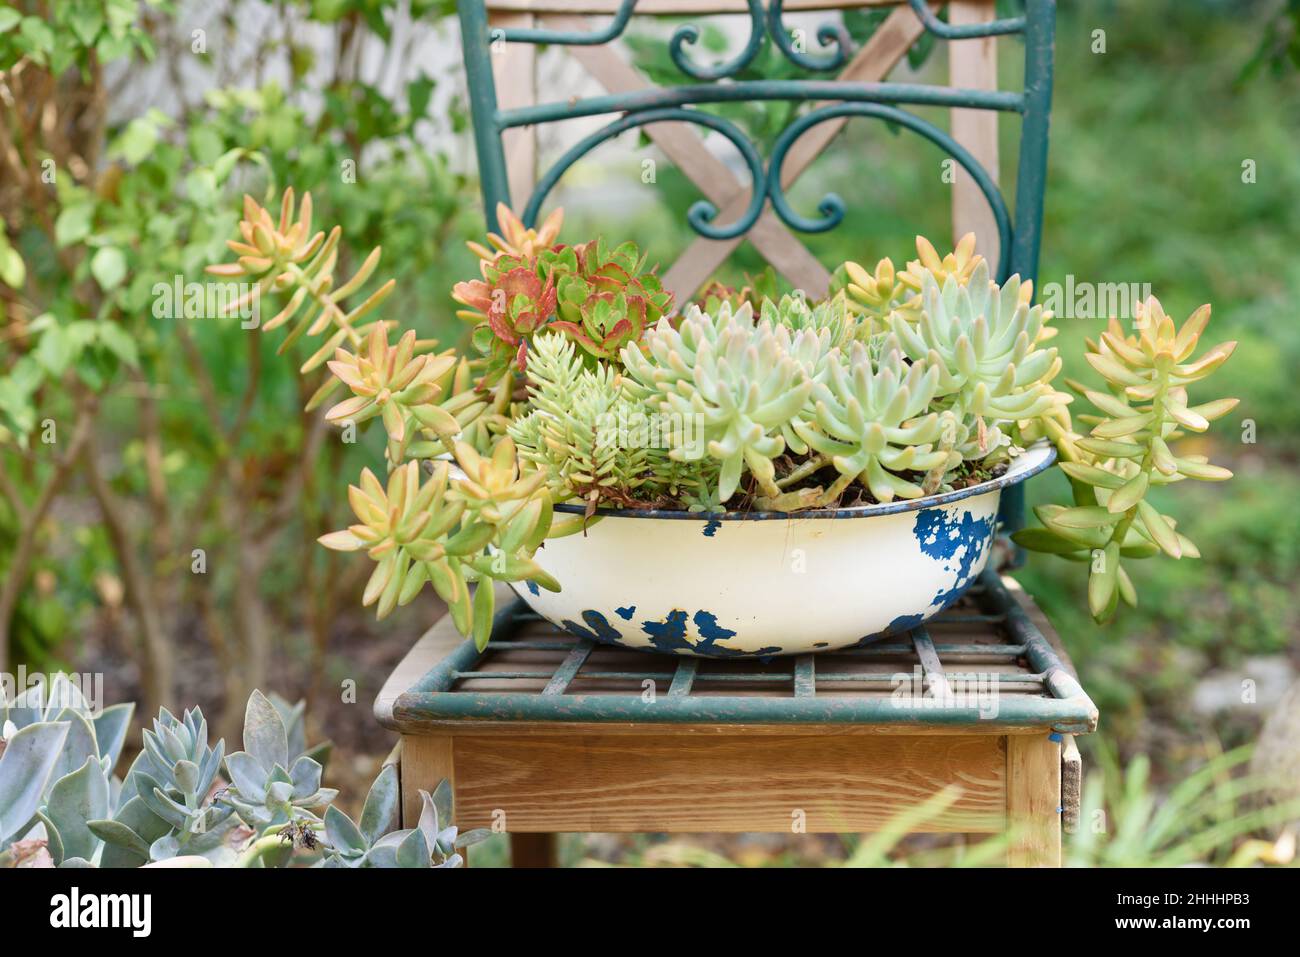 Reused planter ideas. Old basin turn into garden flower pots. Recycled garden design, diy and low-waste lifestyle. Stock Photo